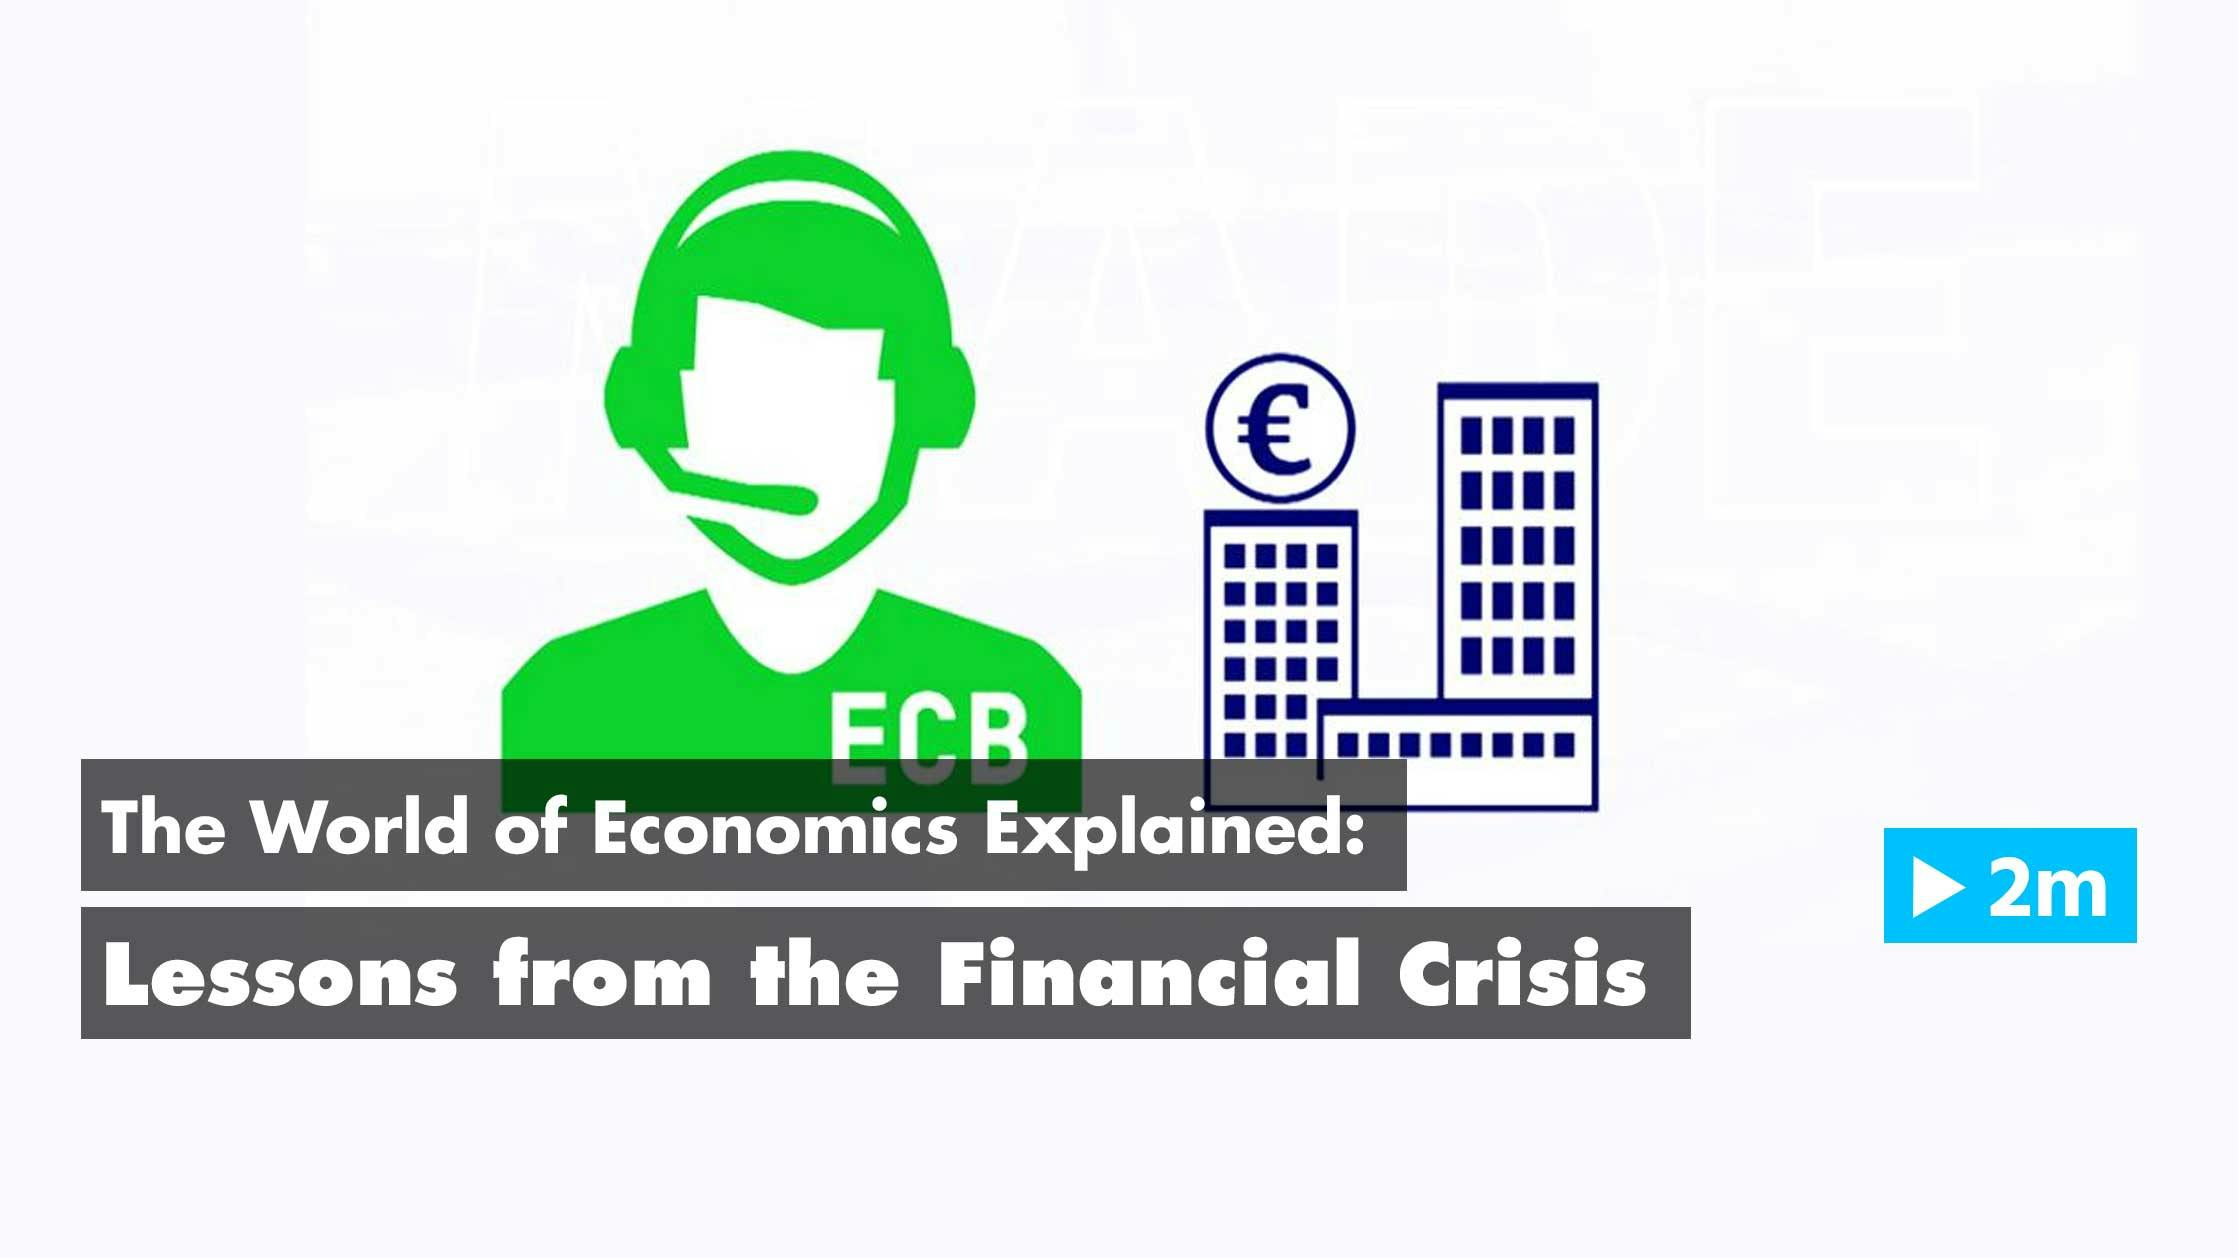 The World of Economics Explained: Lessons from the financial crisis